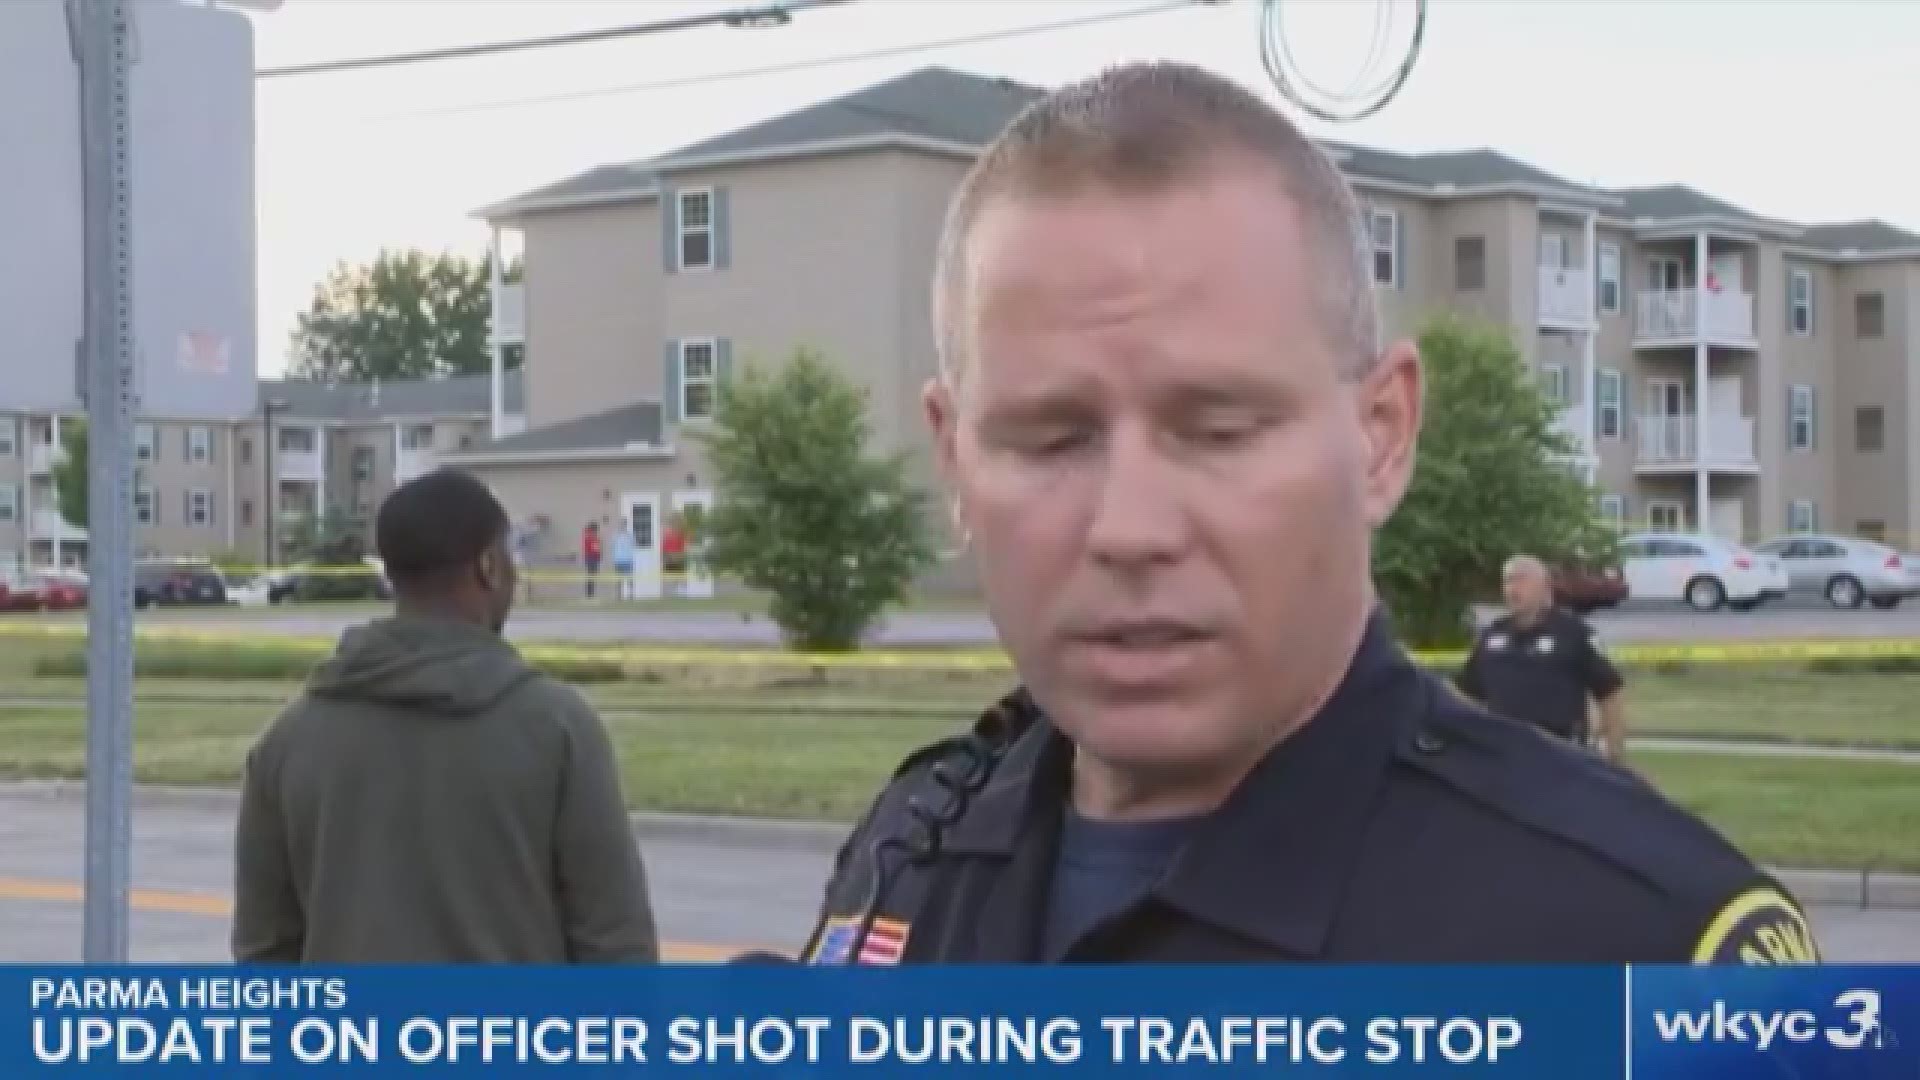 Officials provide update on Parma Heights officer shot during traffic stop